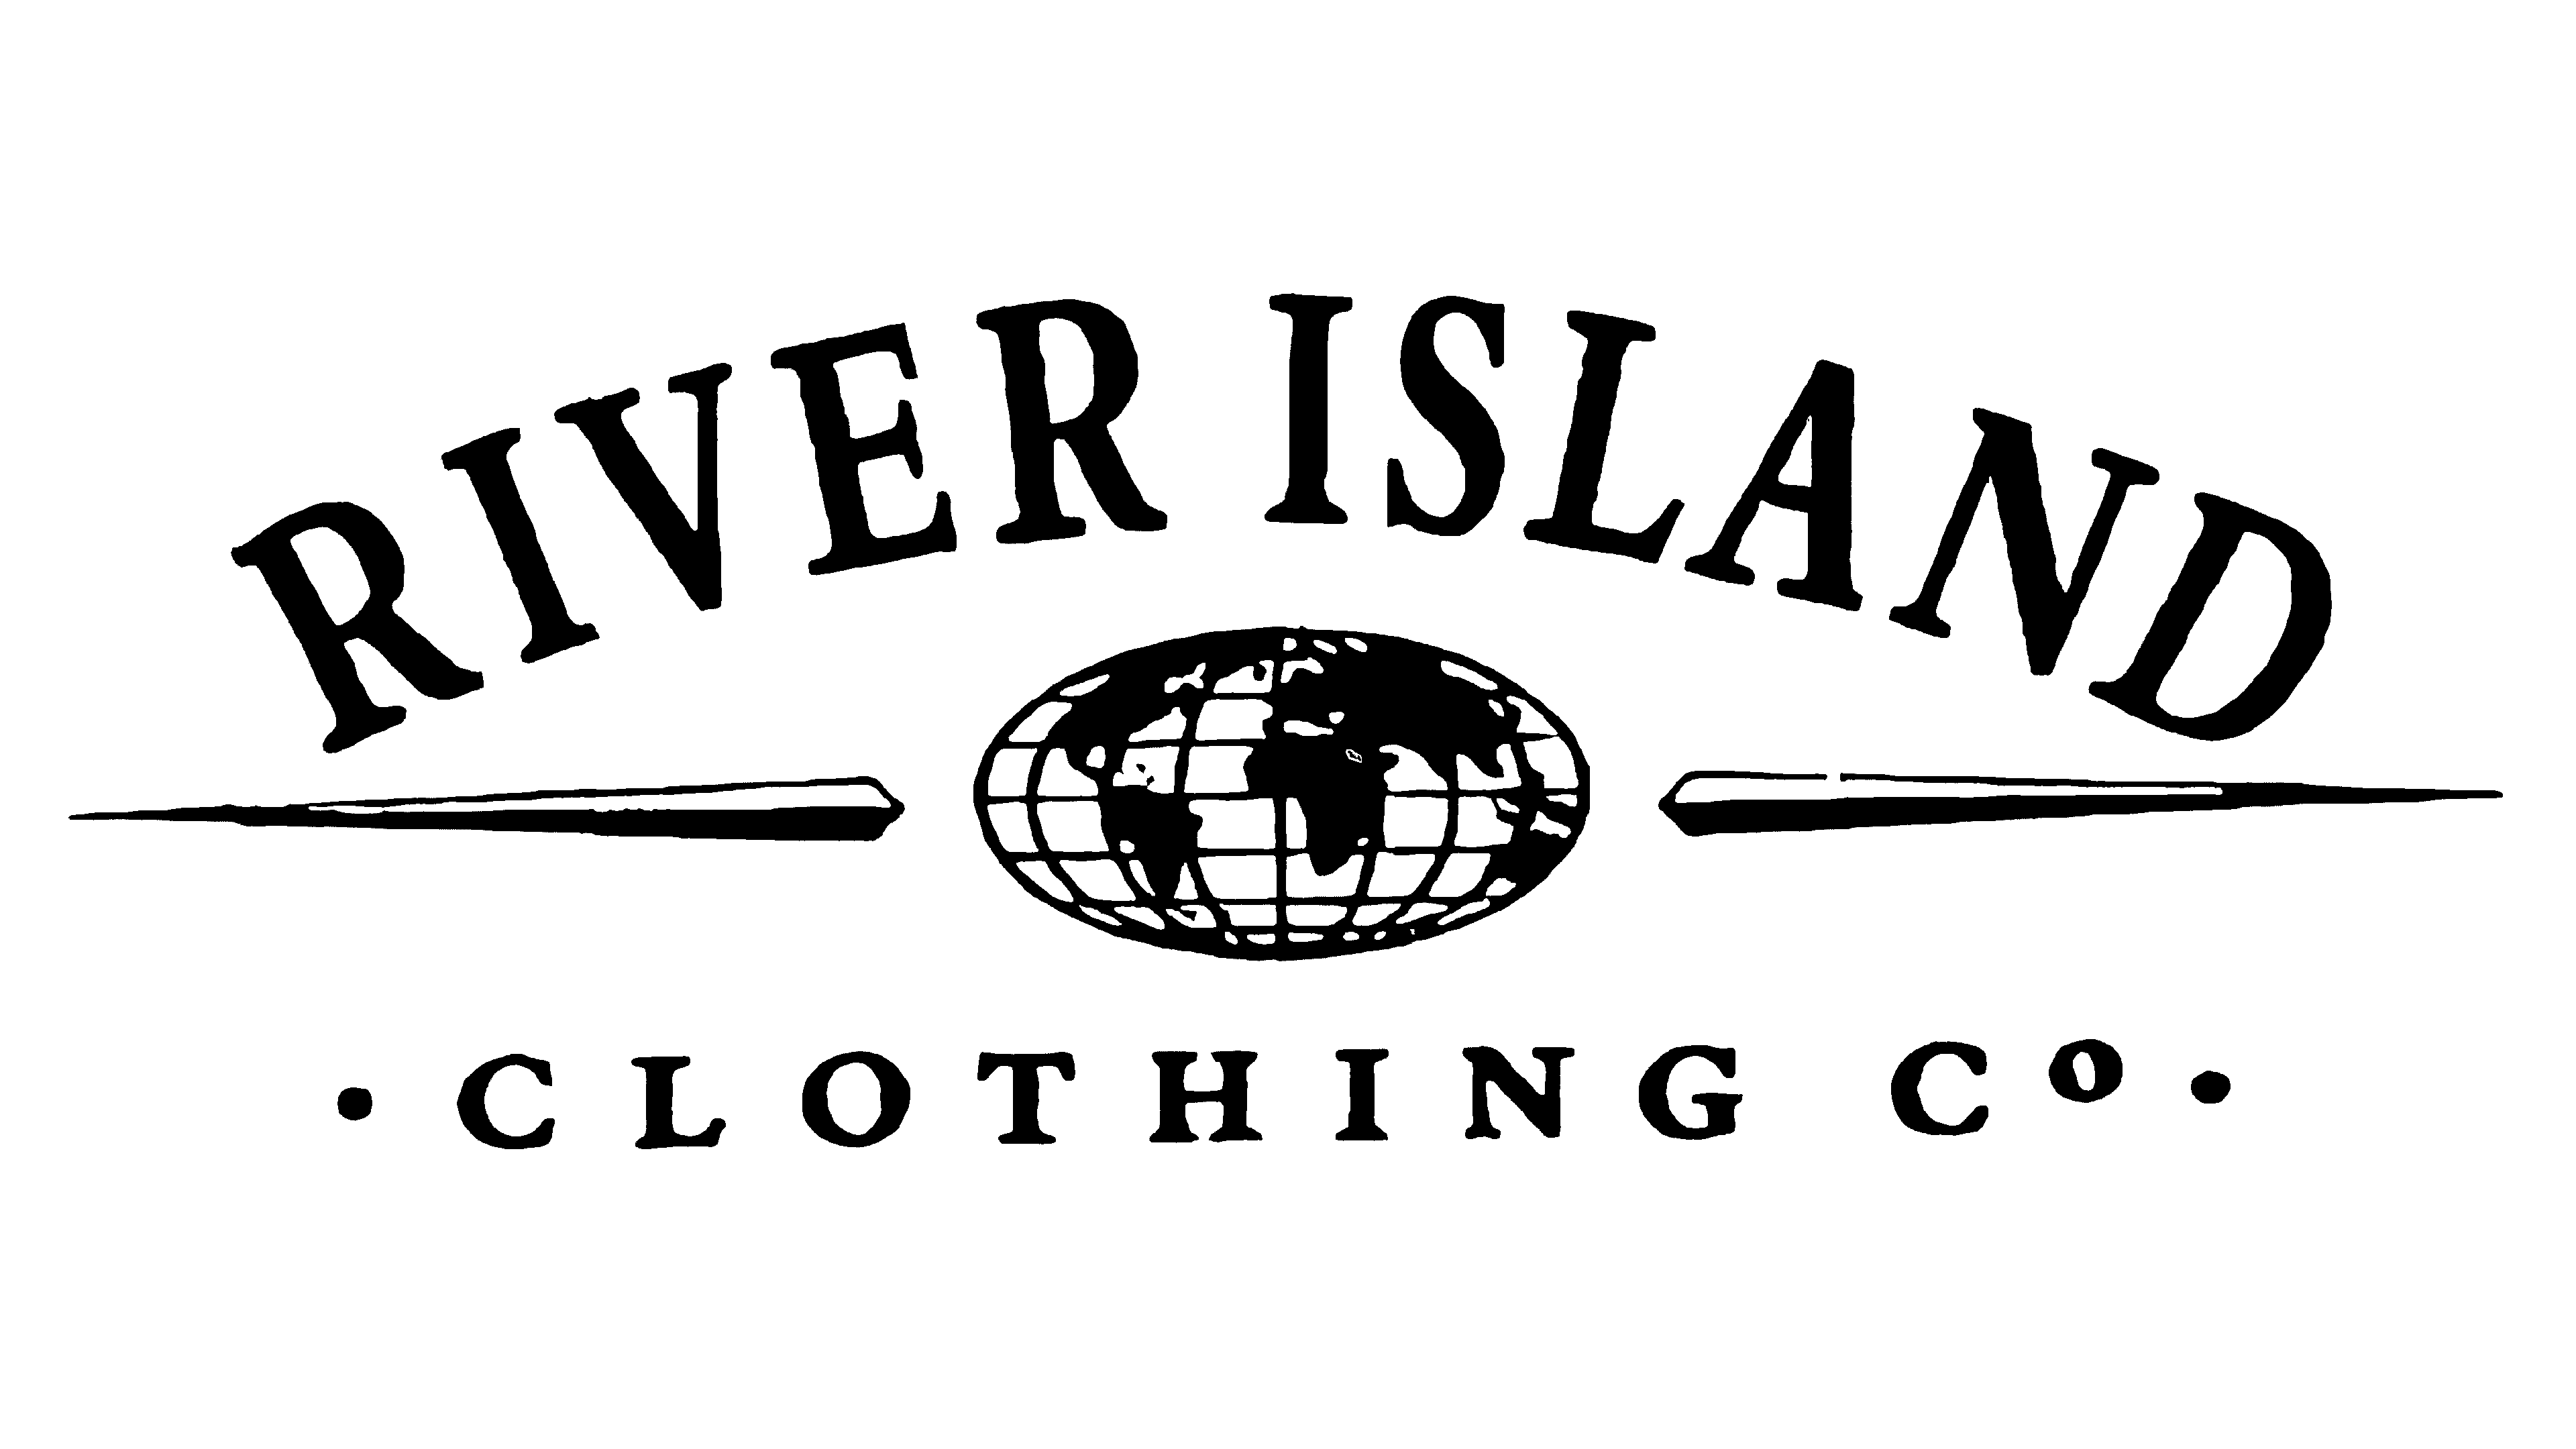 River Island Logo and symbol, meaning, history, PNG, brand